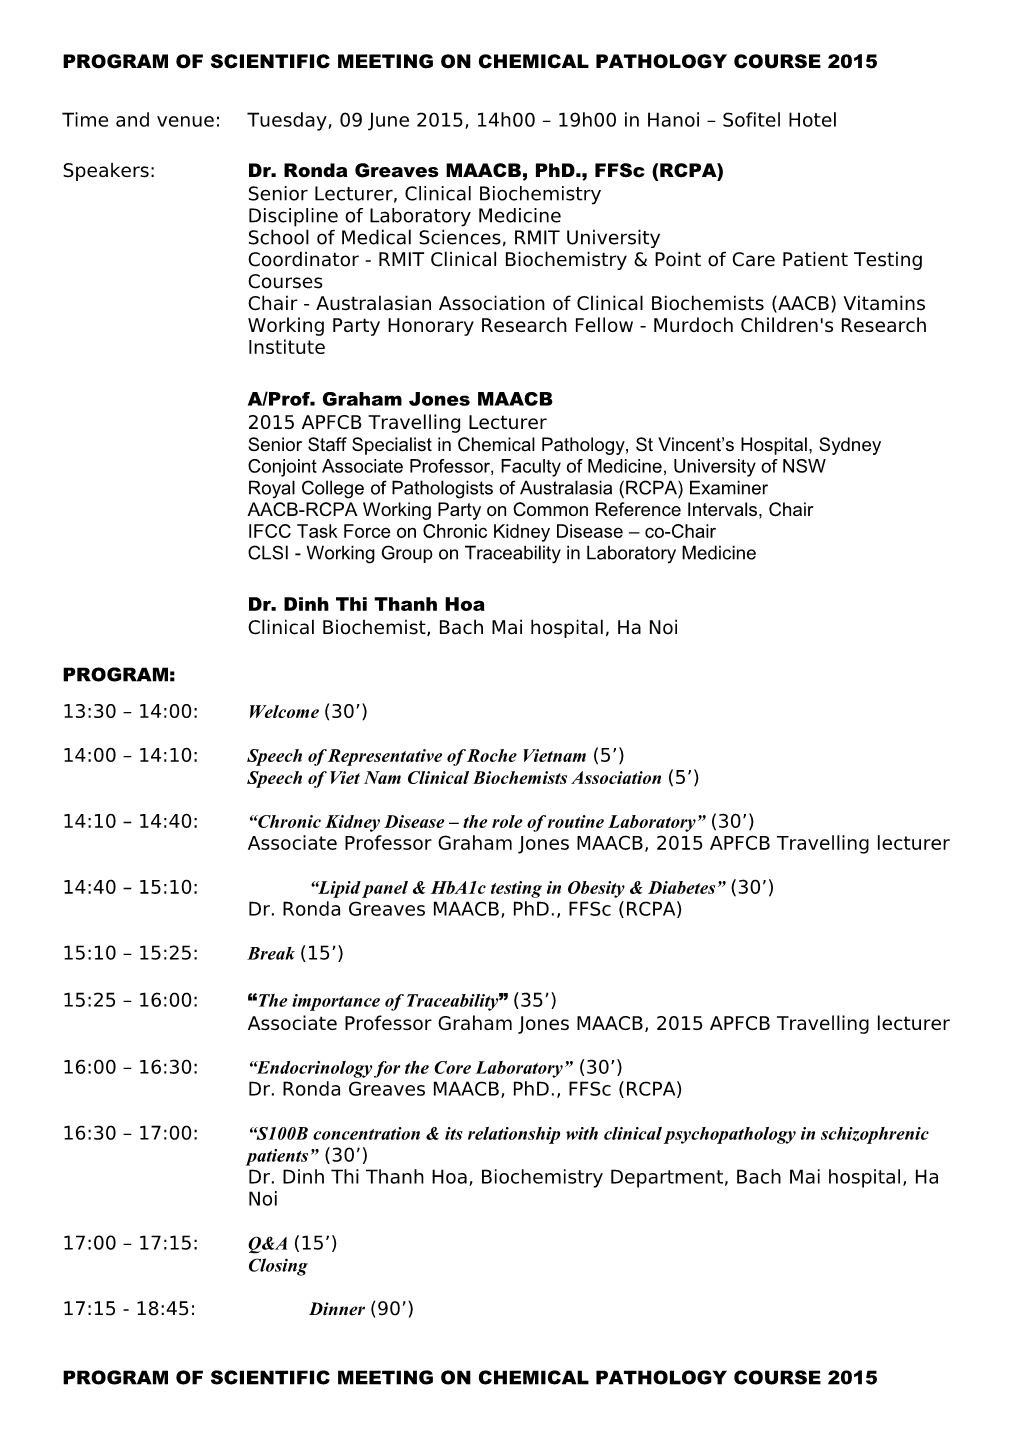 Program of Scientific Meeting on Chemical Pathology Course 2015